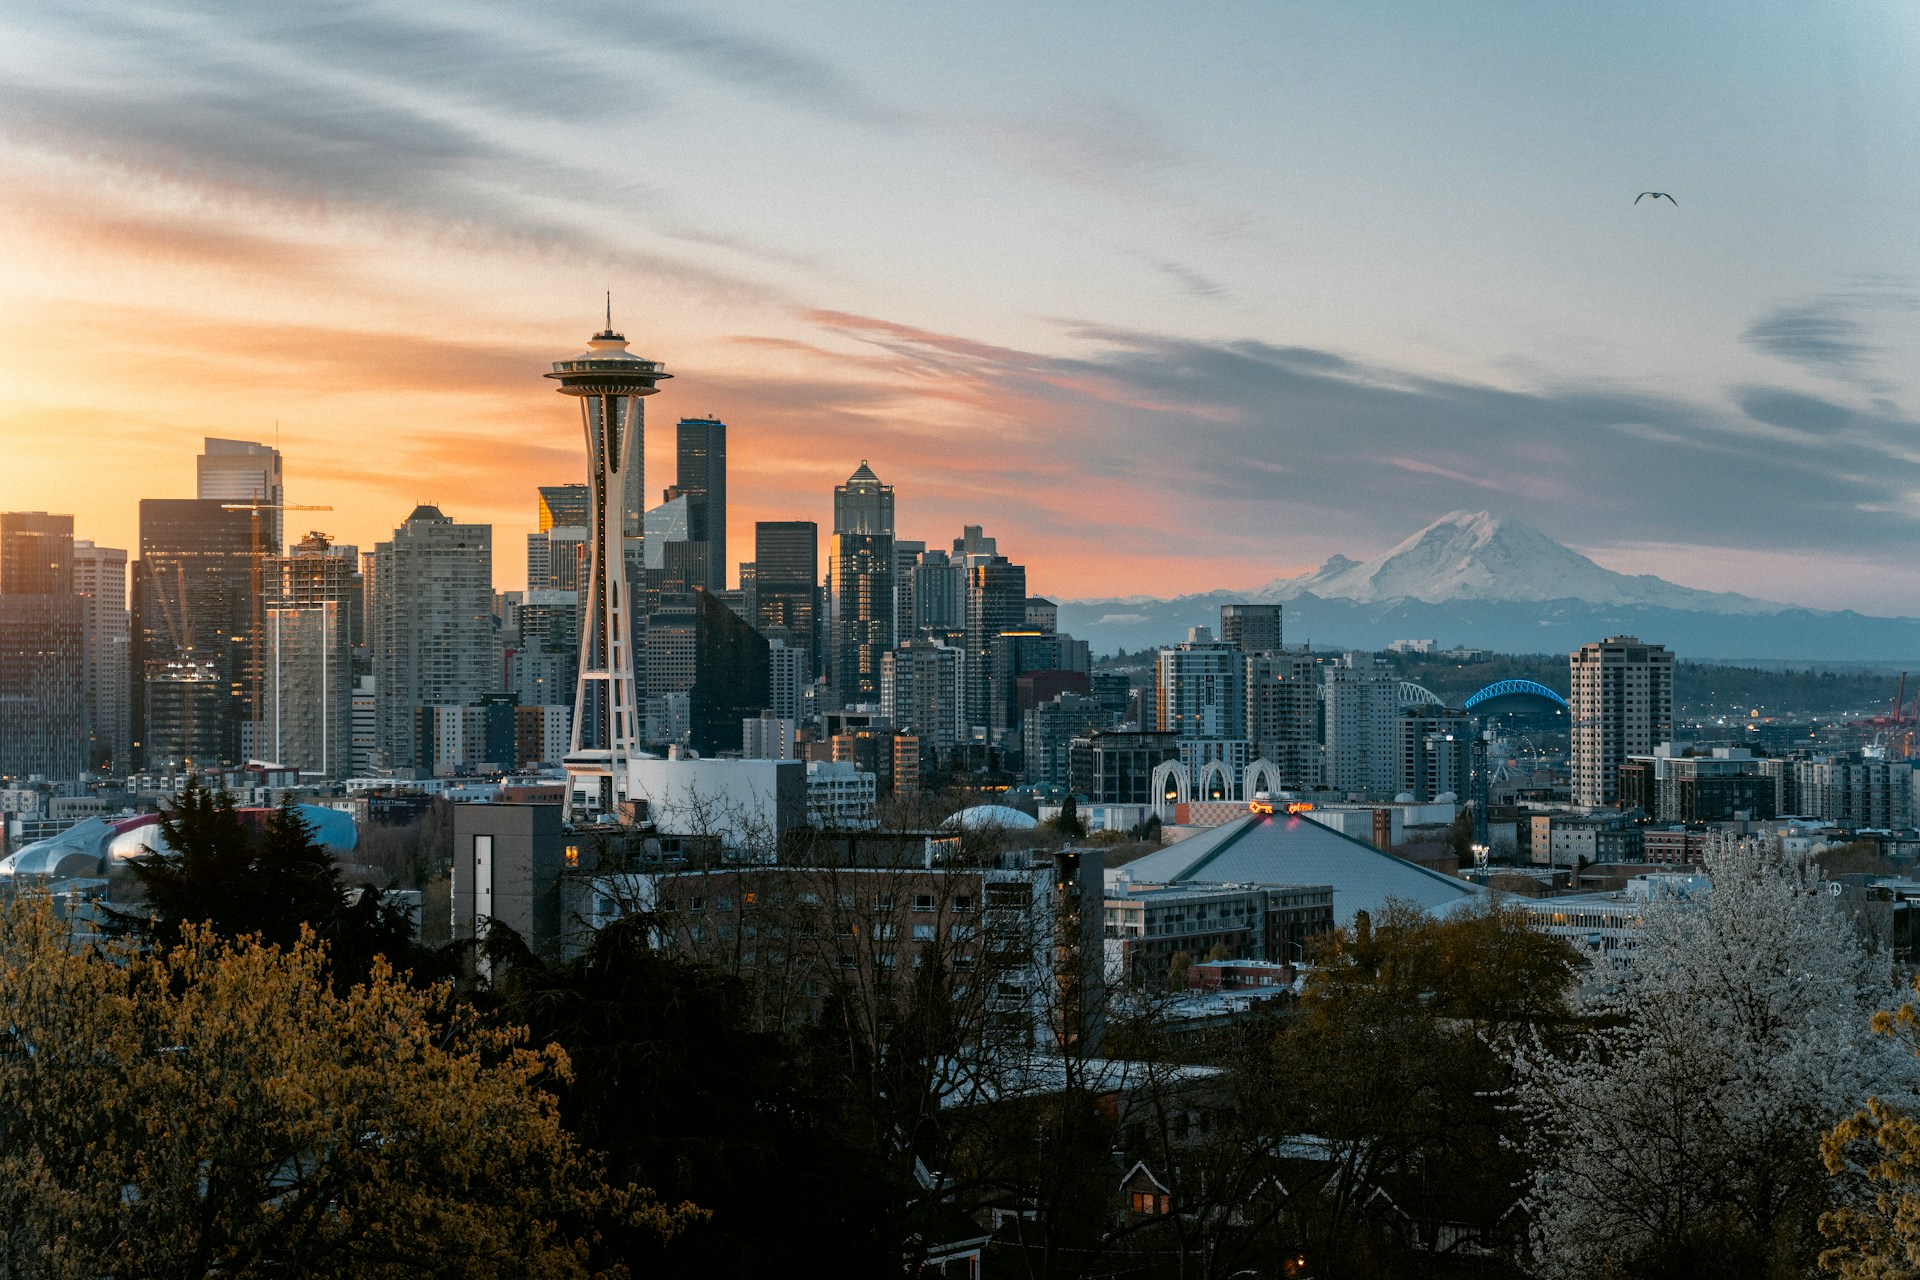 Broad view of Seattle with a mountain on the background